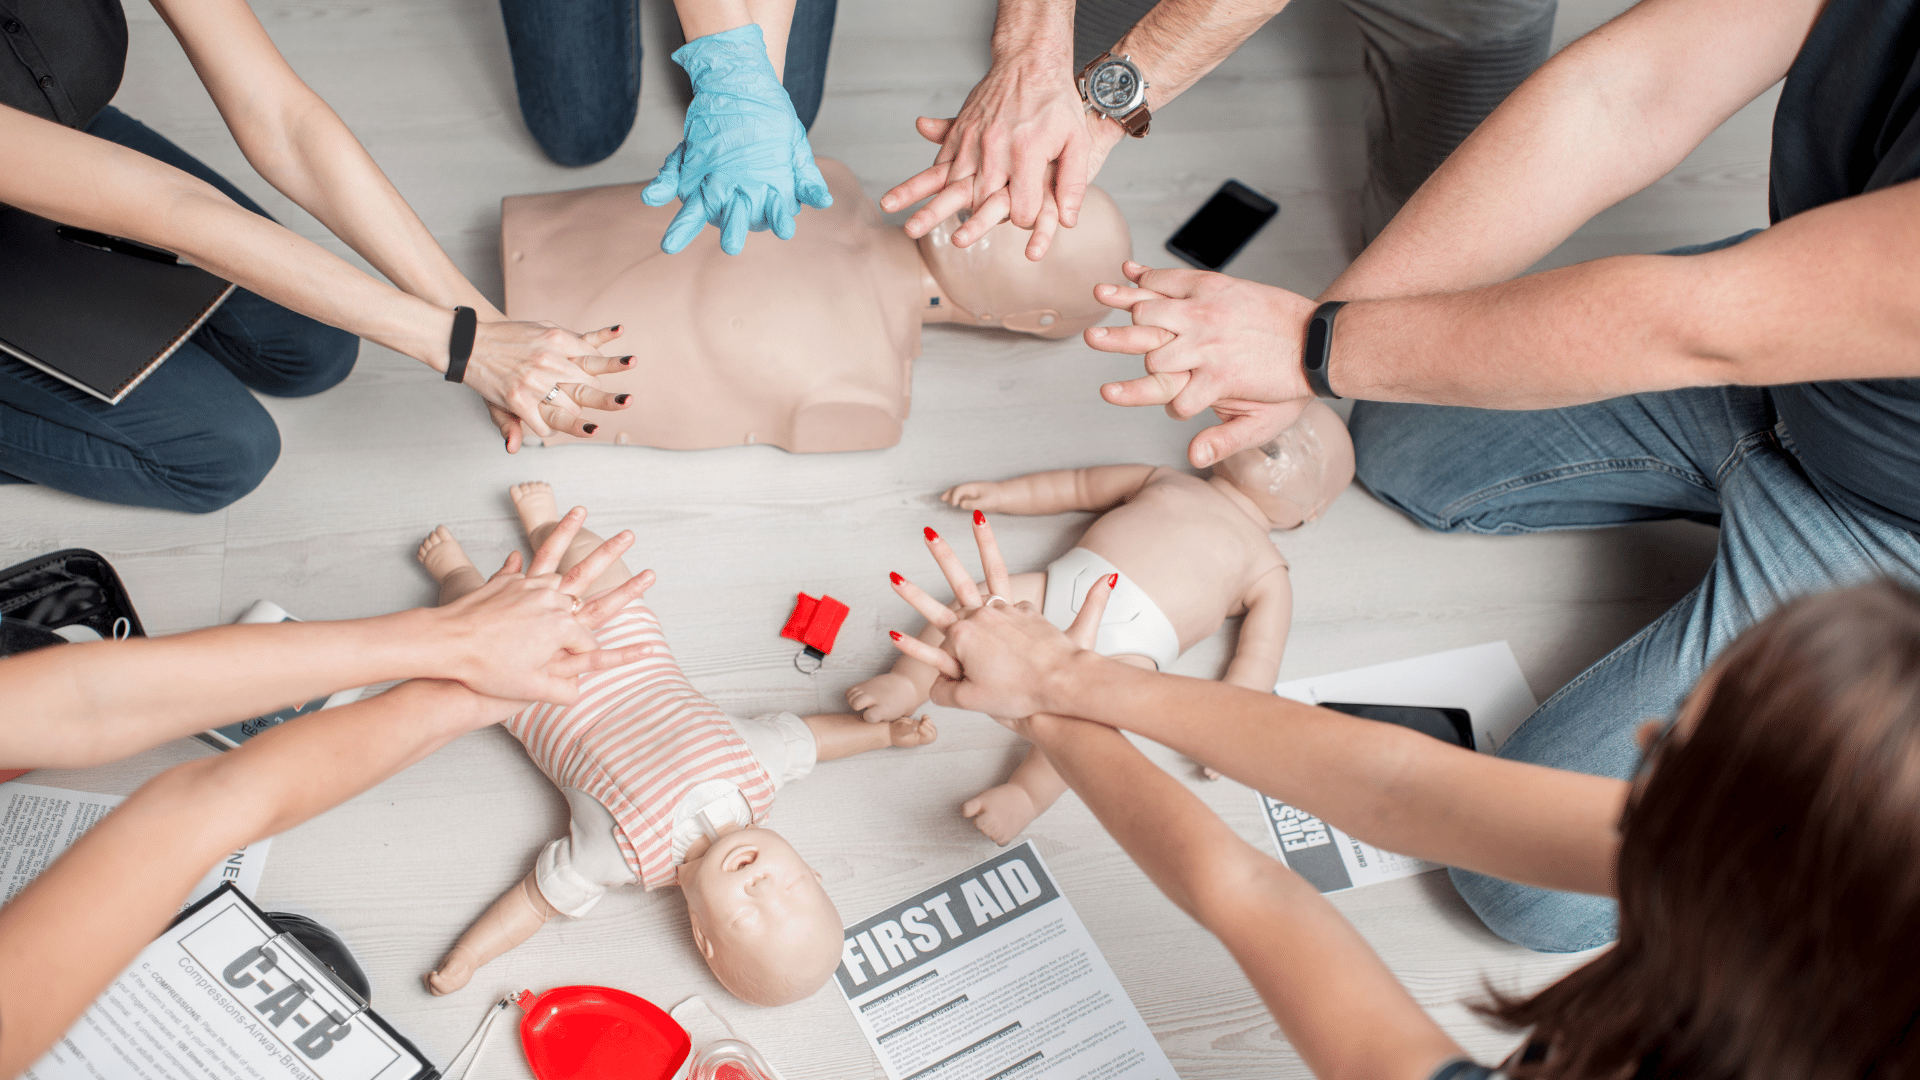 Persons undergoing First Aid and CPR training.